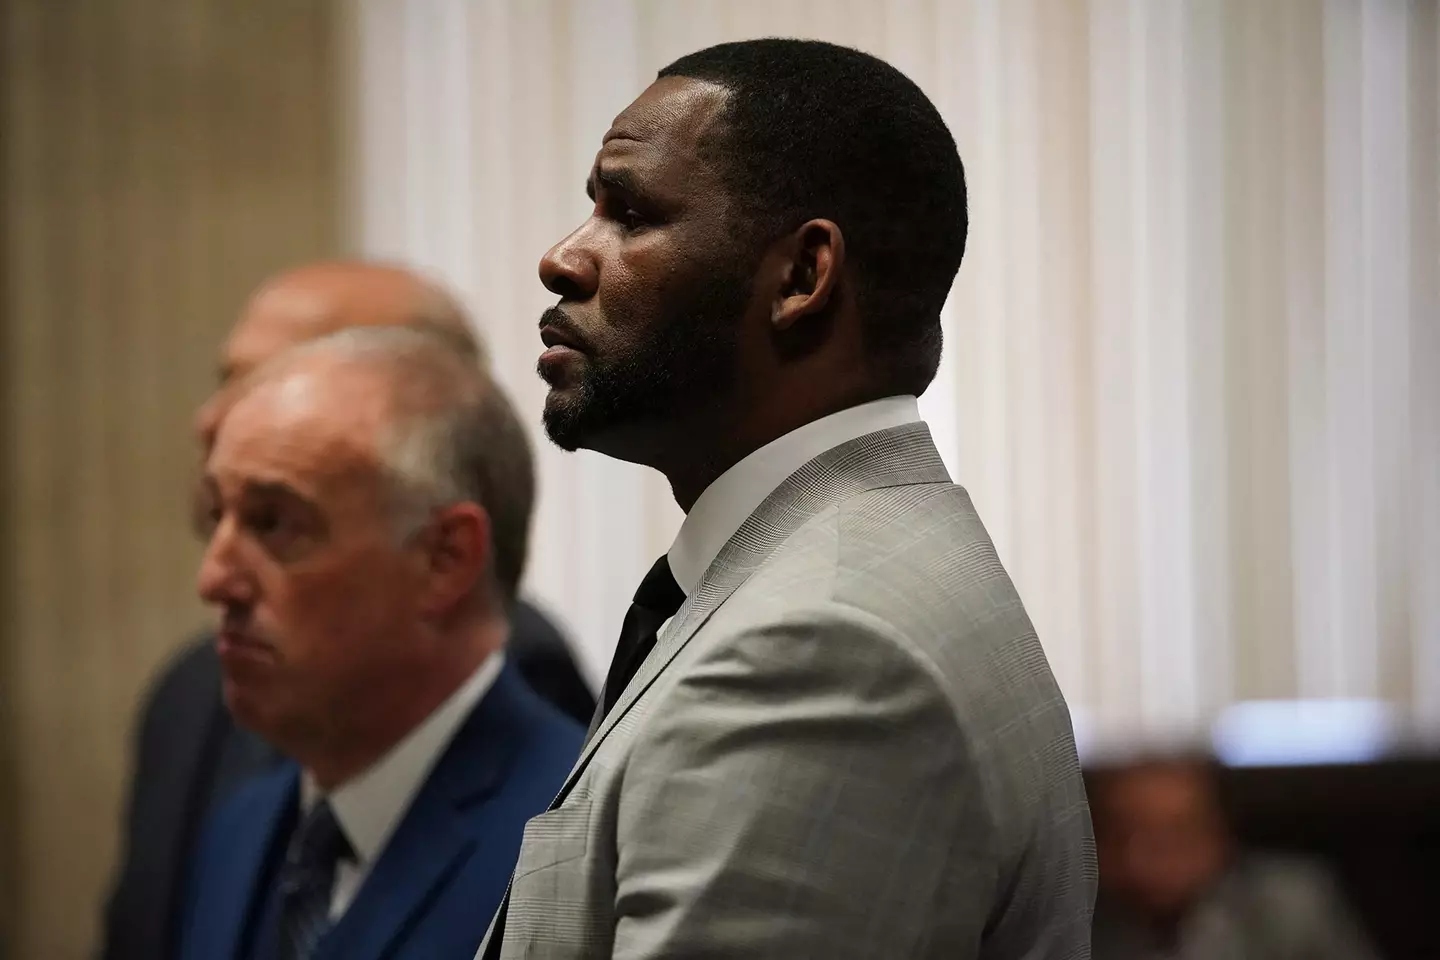 R Kelly was found guilty on all nine counts last September.